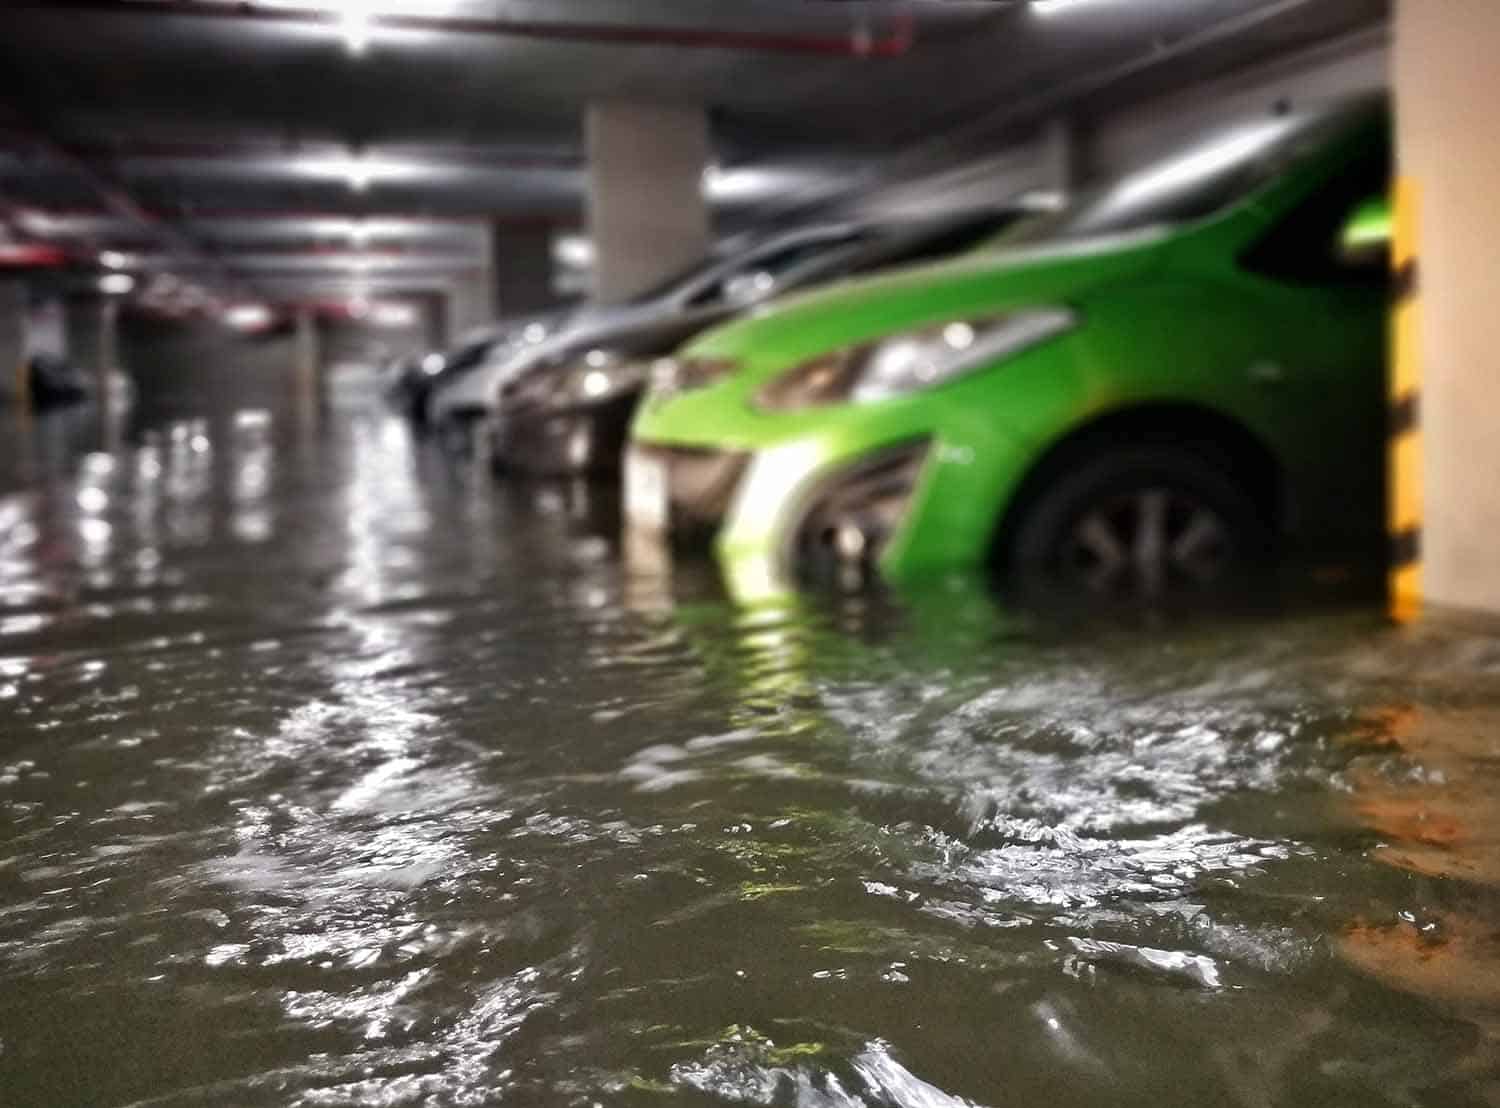 prodtect your car from floods